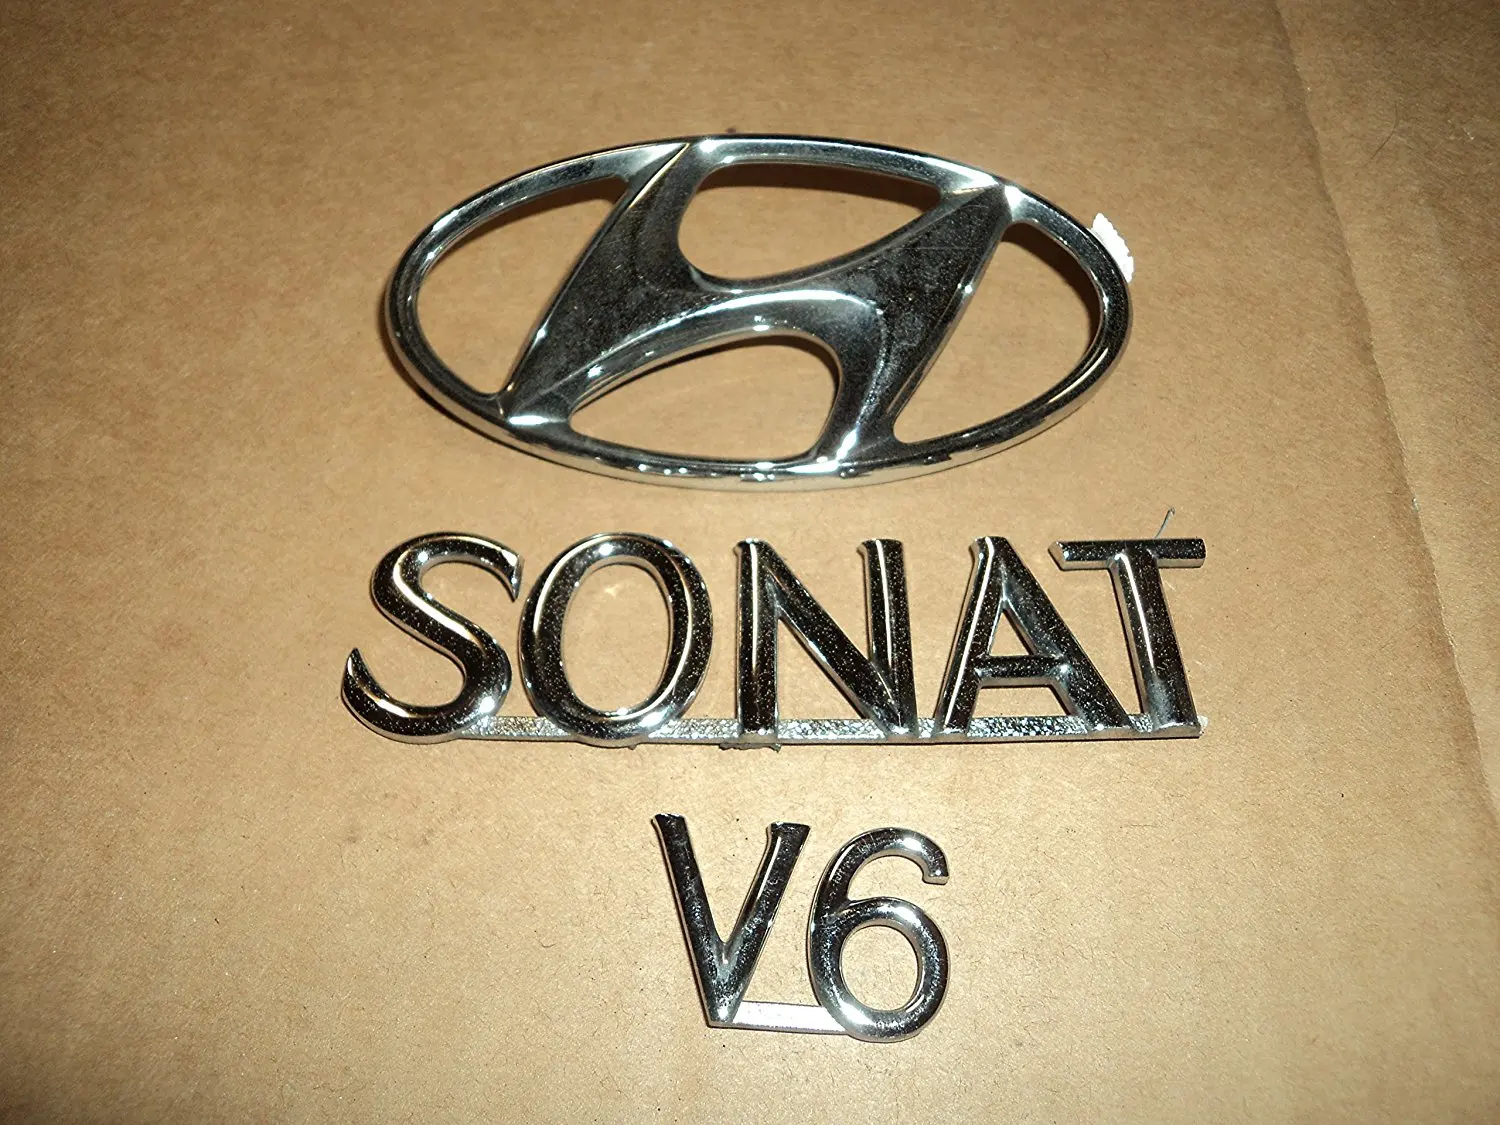 New OEM Rear Trunk *H* Emblem Name Plate For 2015 Sonata 86300C1000